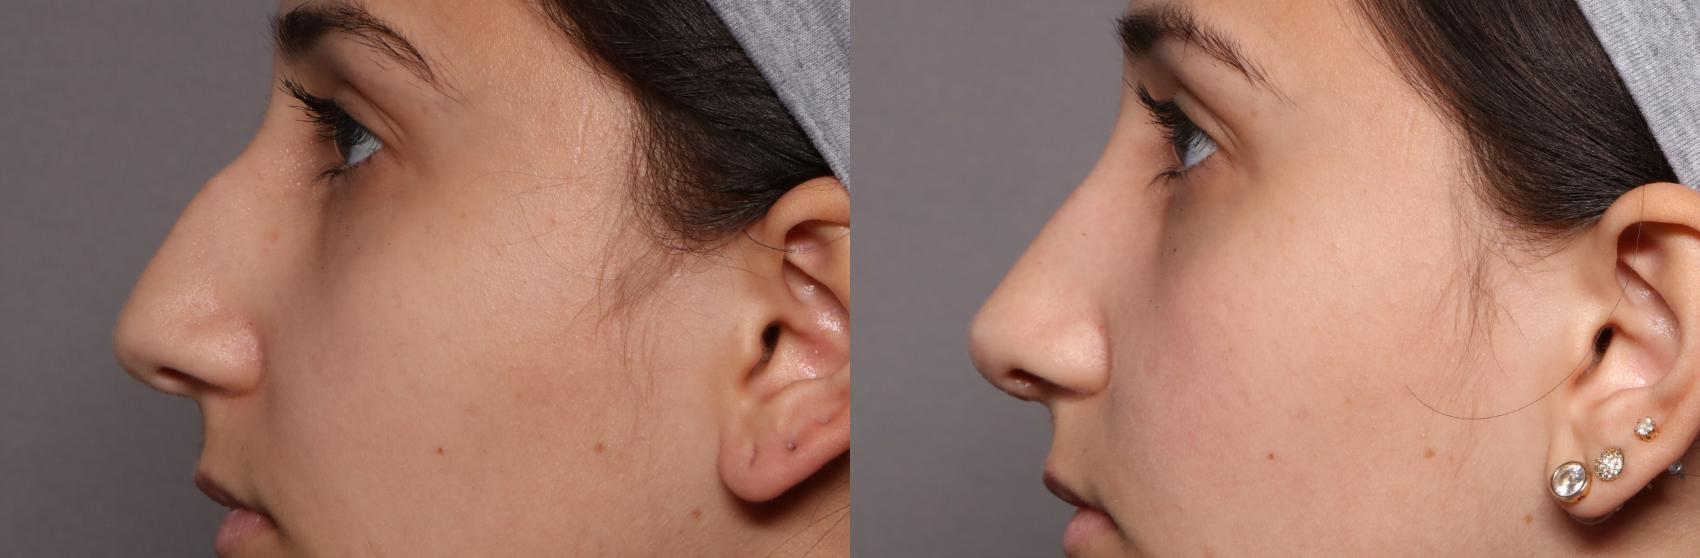 Pre-op Left Side View of Rhinoplasty Patient of Dr. Hasen in Naples Florida